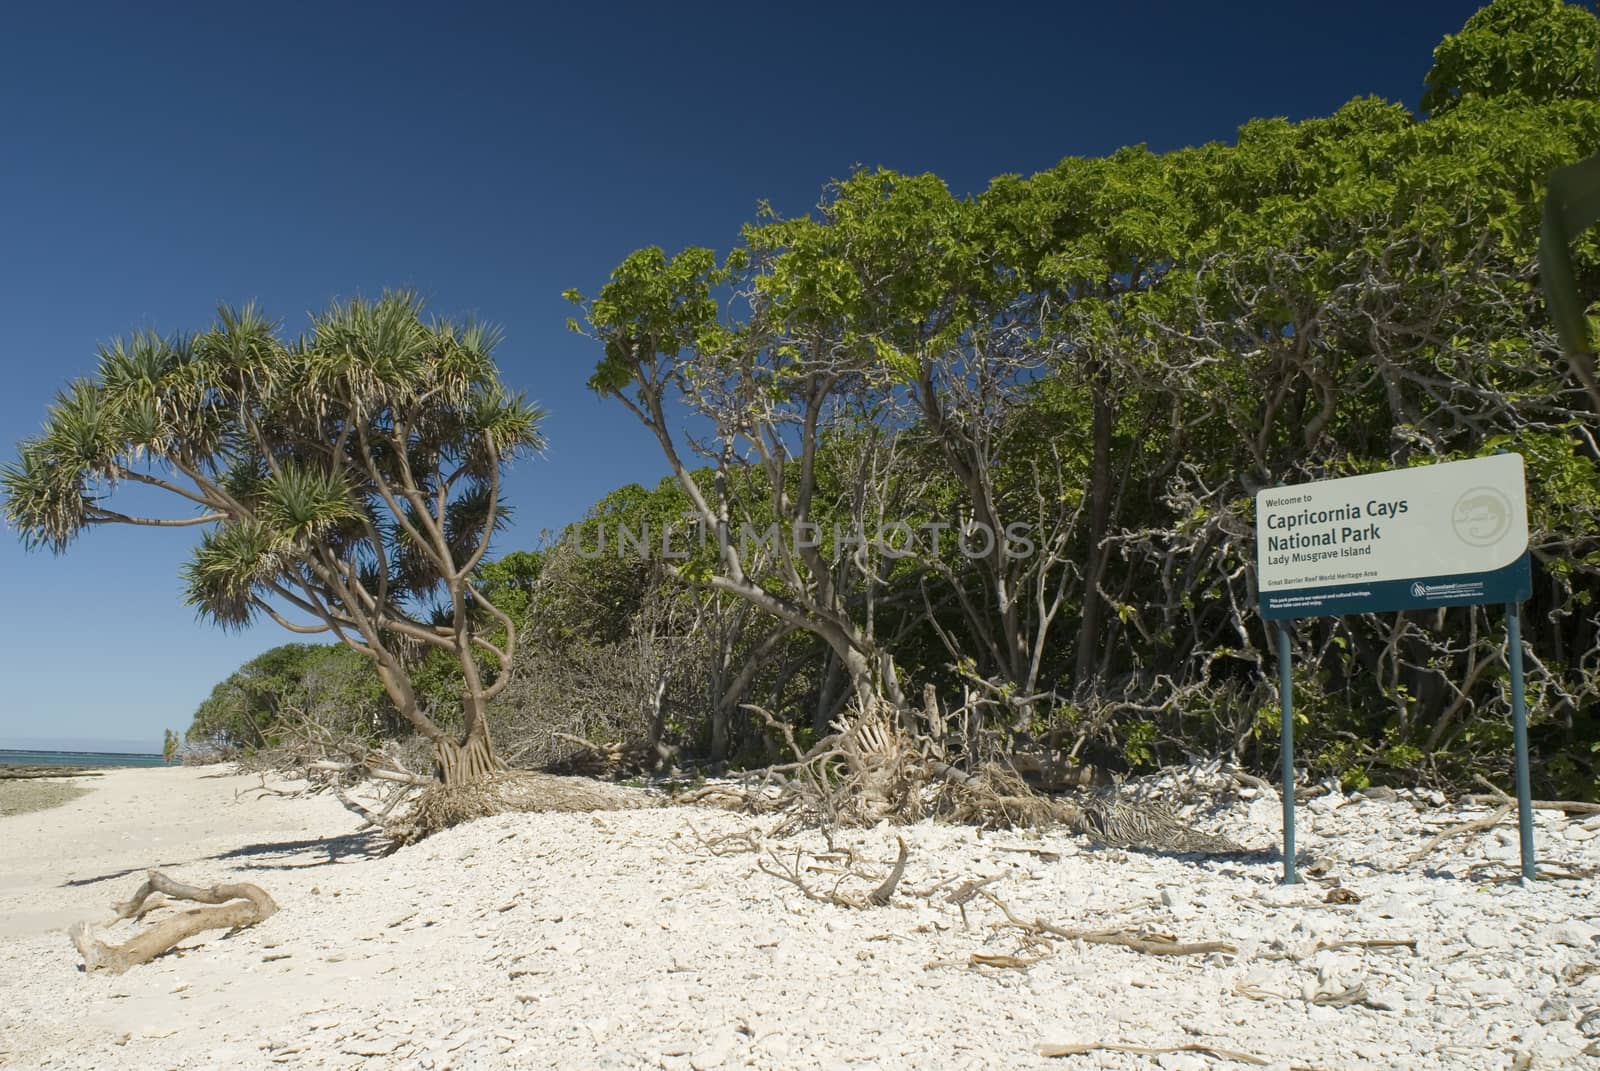 Capricornia Cays Park Sign near trees on beach of Lady Musgrave Barrier Reef island